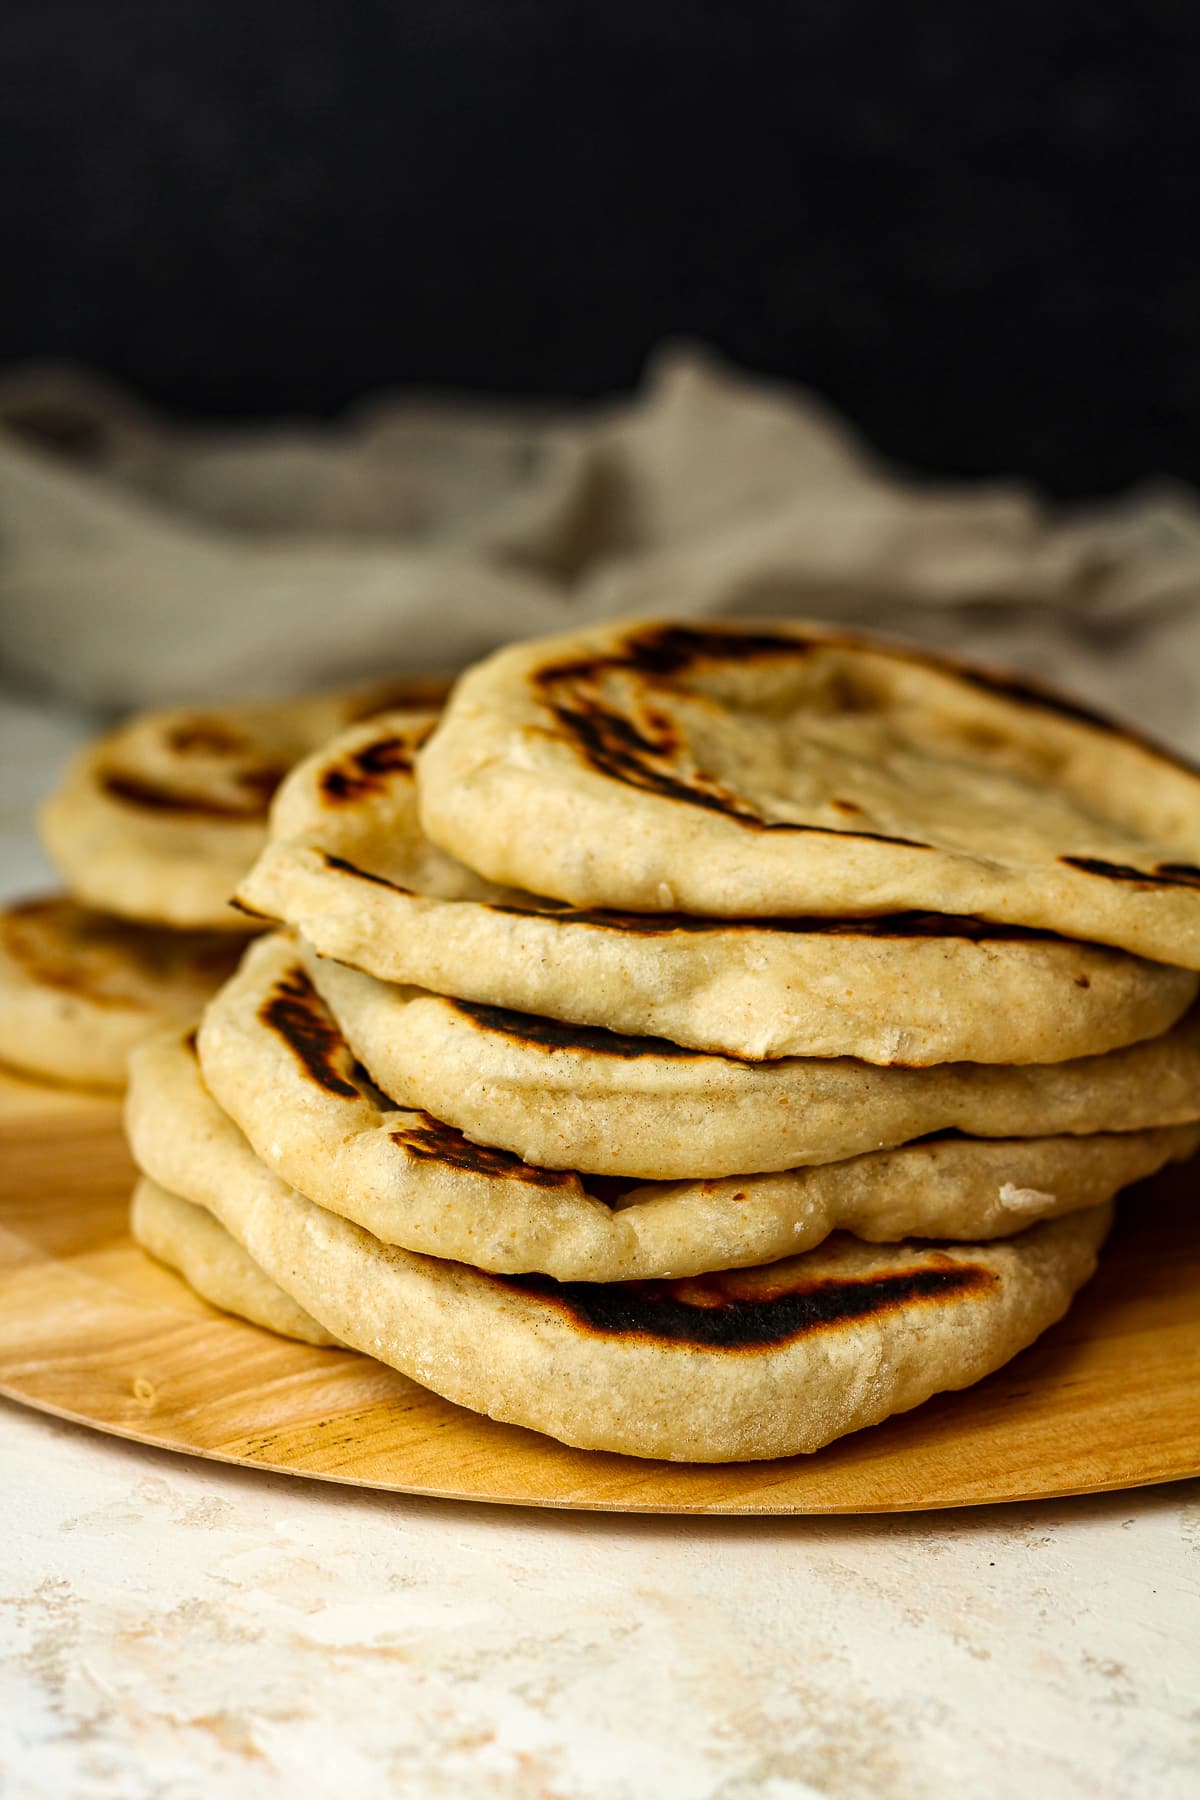 A stack of sourdough naan showing the pillowy centers.